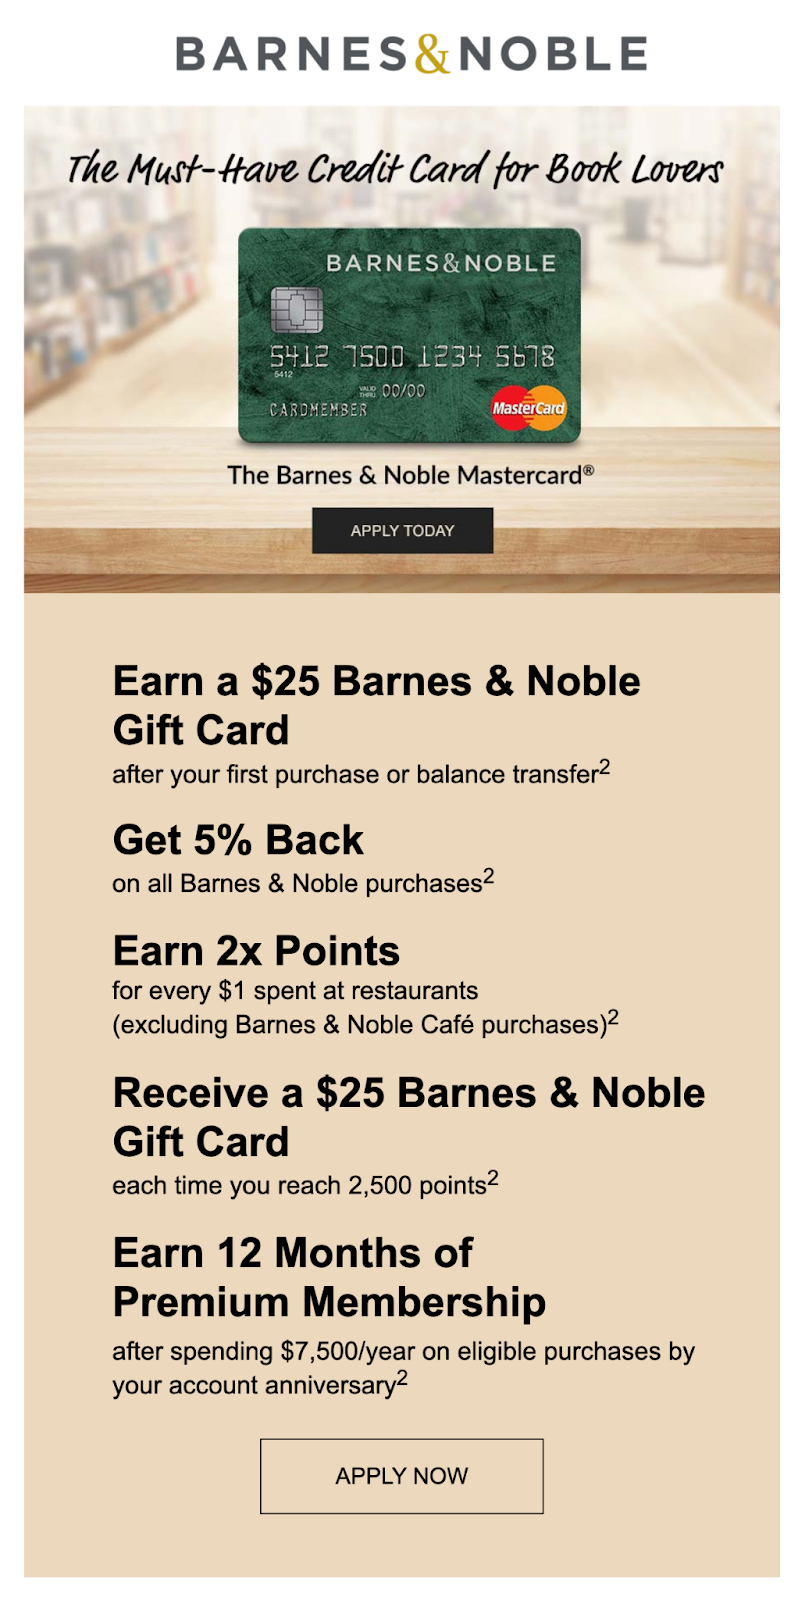 Barnes & Noble email